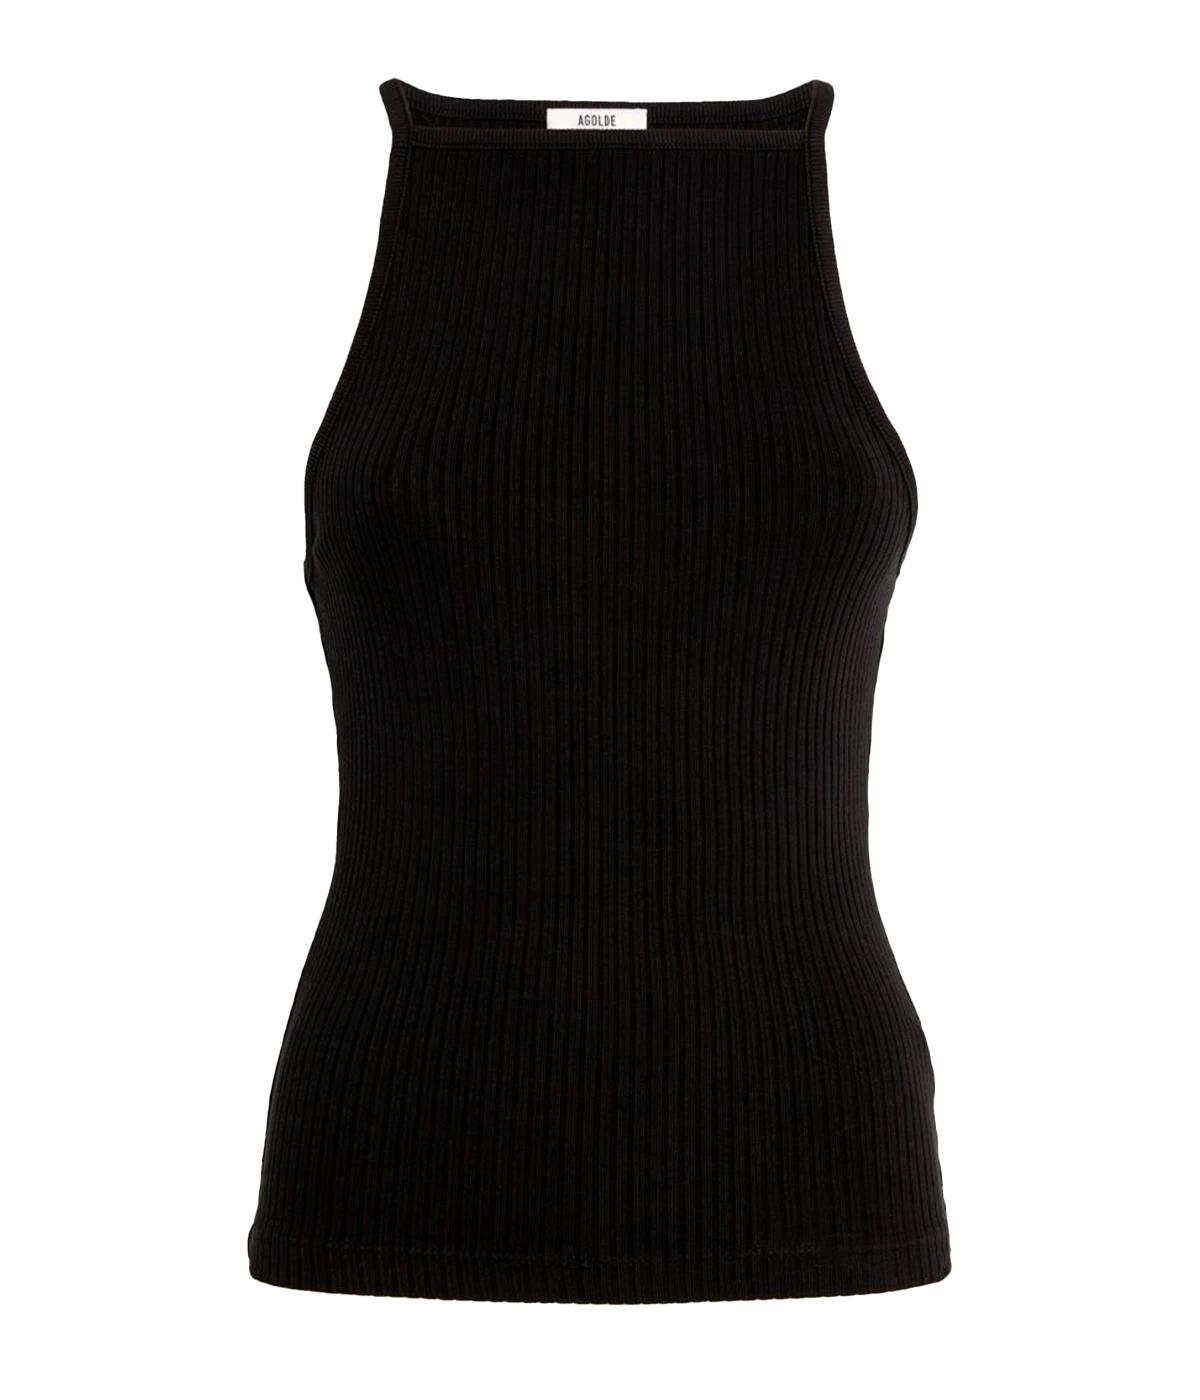 An elevated basic tank, made from a soft rib cotton and in a classic black colourway. Featuring a high neckline, long bodice and flattering fit. Summer staple, bra friendly, date night top, made in USA, comfortable, elevated basic, date night top.